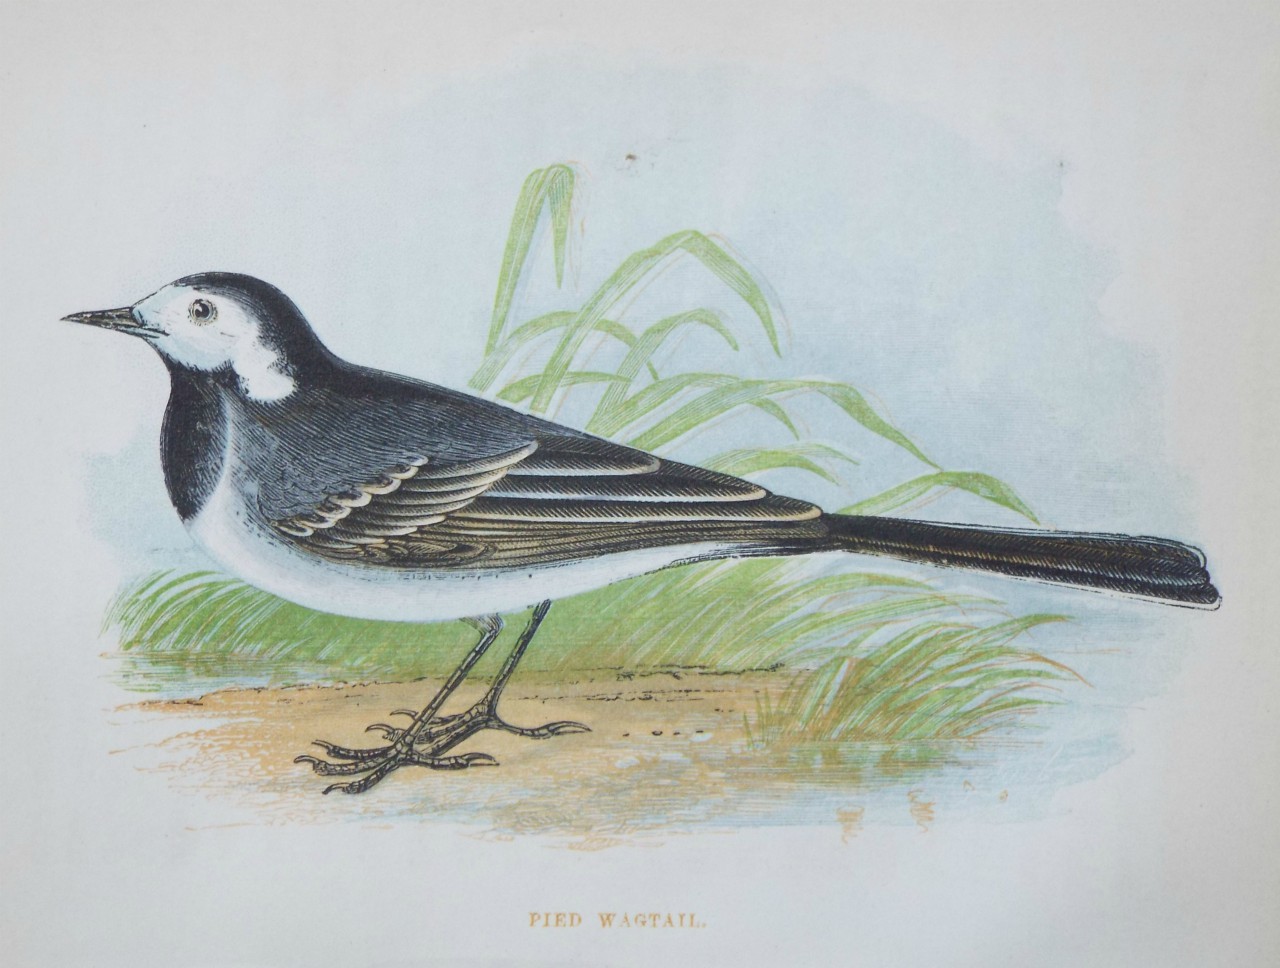 Chromo-lithograph - Pied Wagtail.